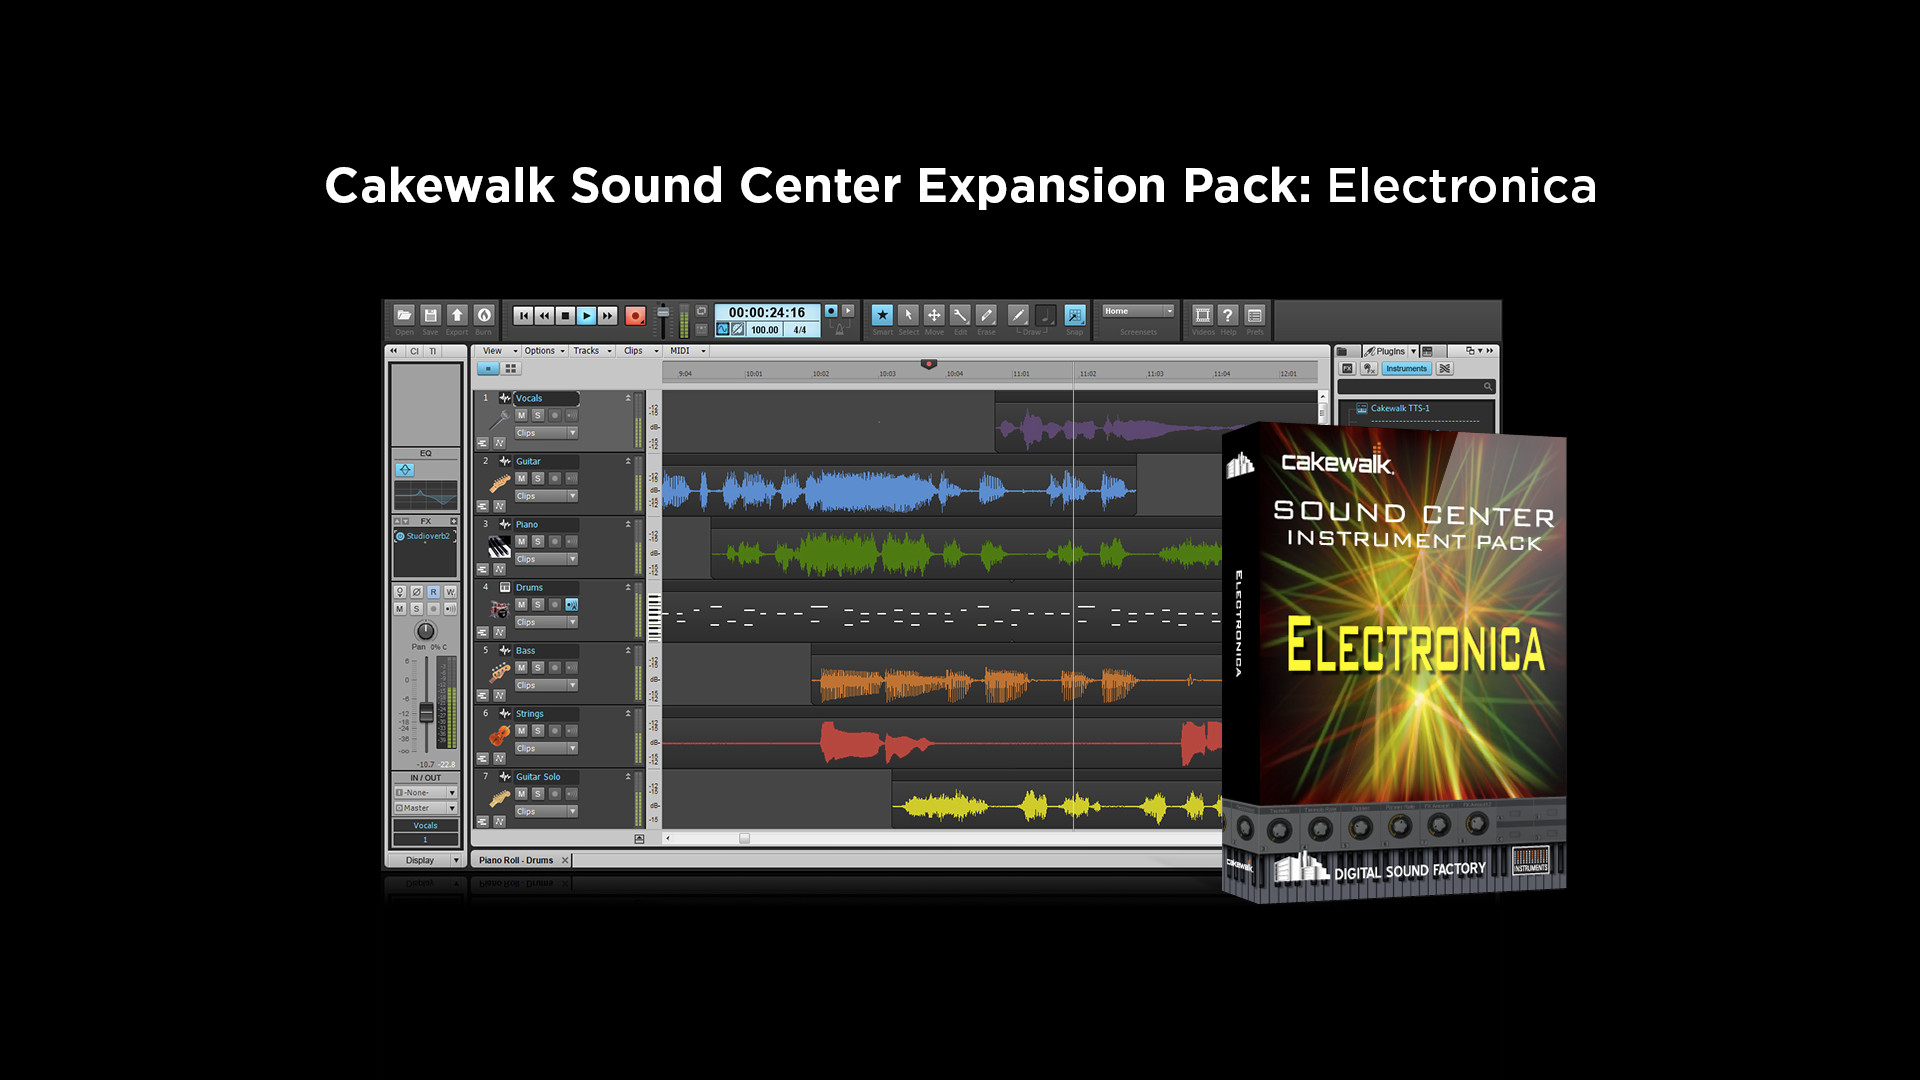 Cakewalk Expansion Pack - Electronica Featured Screenshot #1